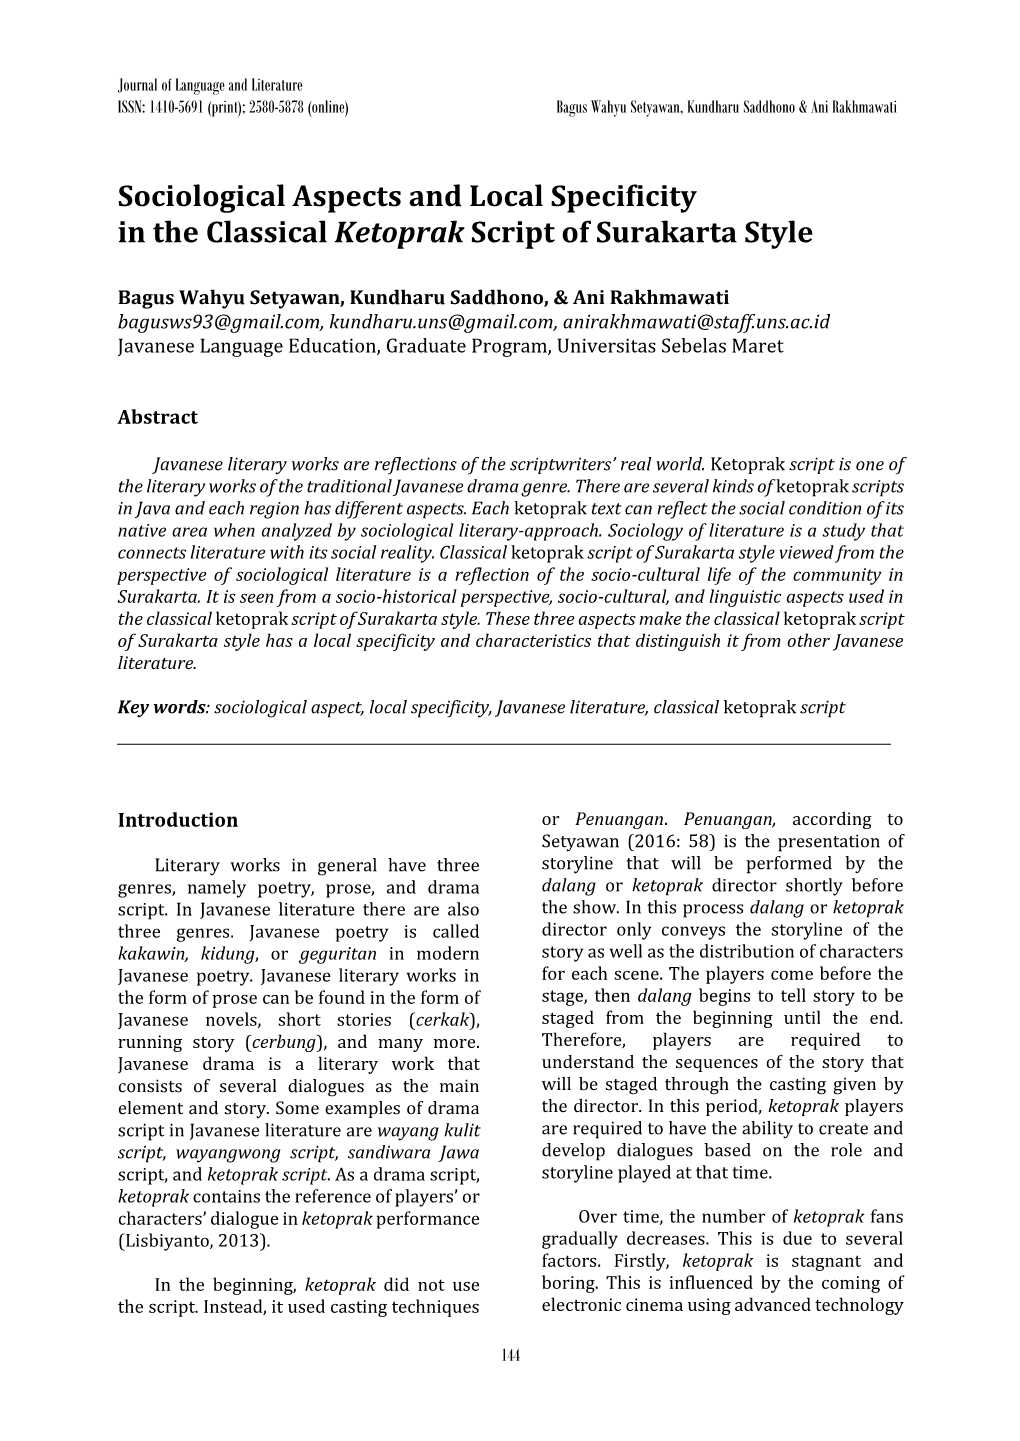 Sociological Aspects and Local Specificity in the Classical Ketoprak Script of Surakarta Style